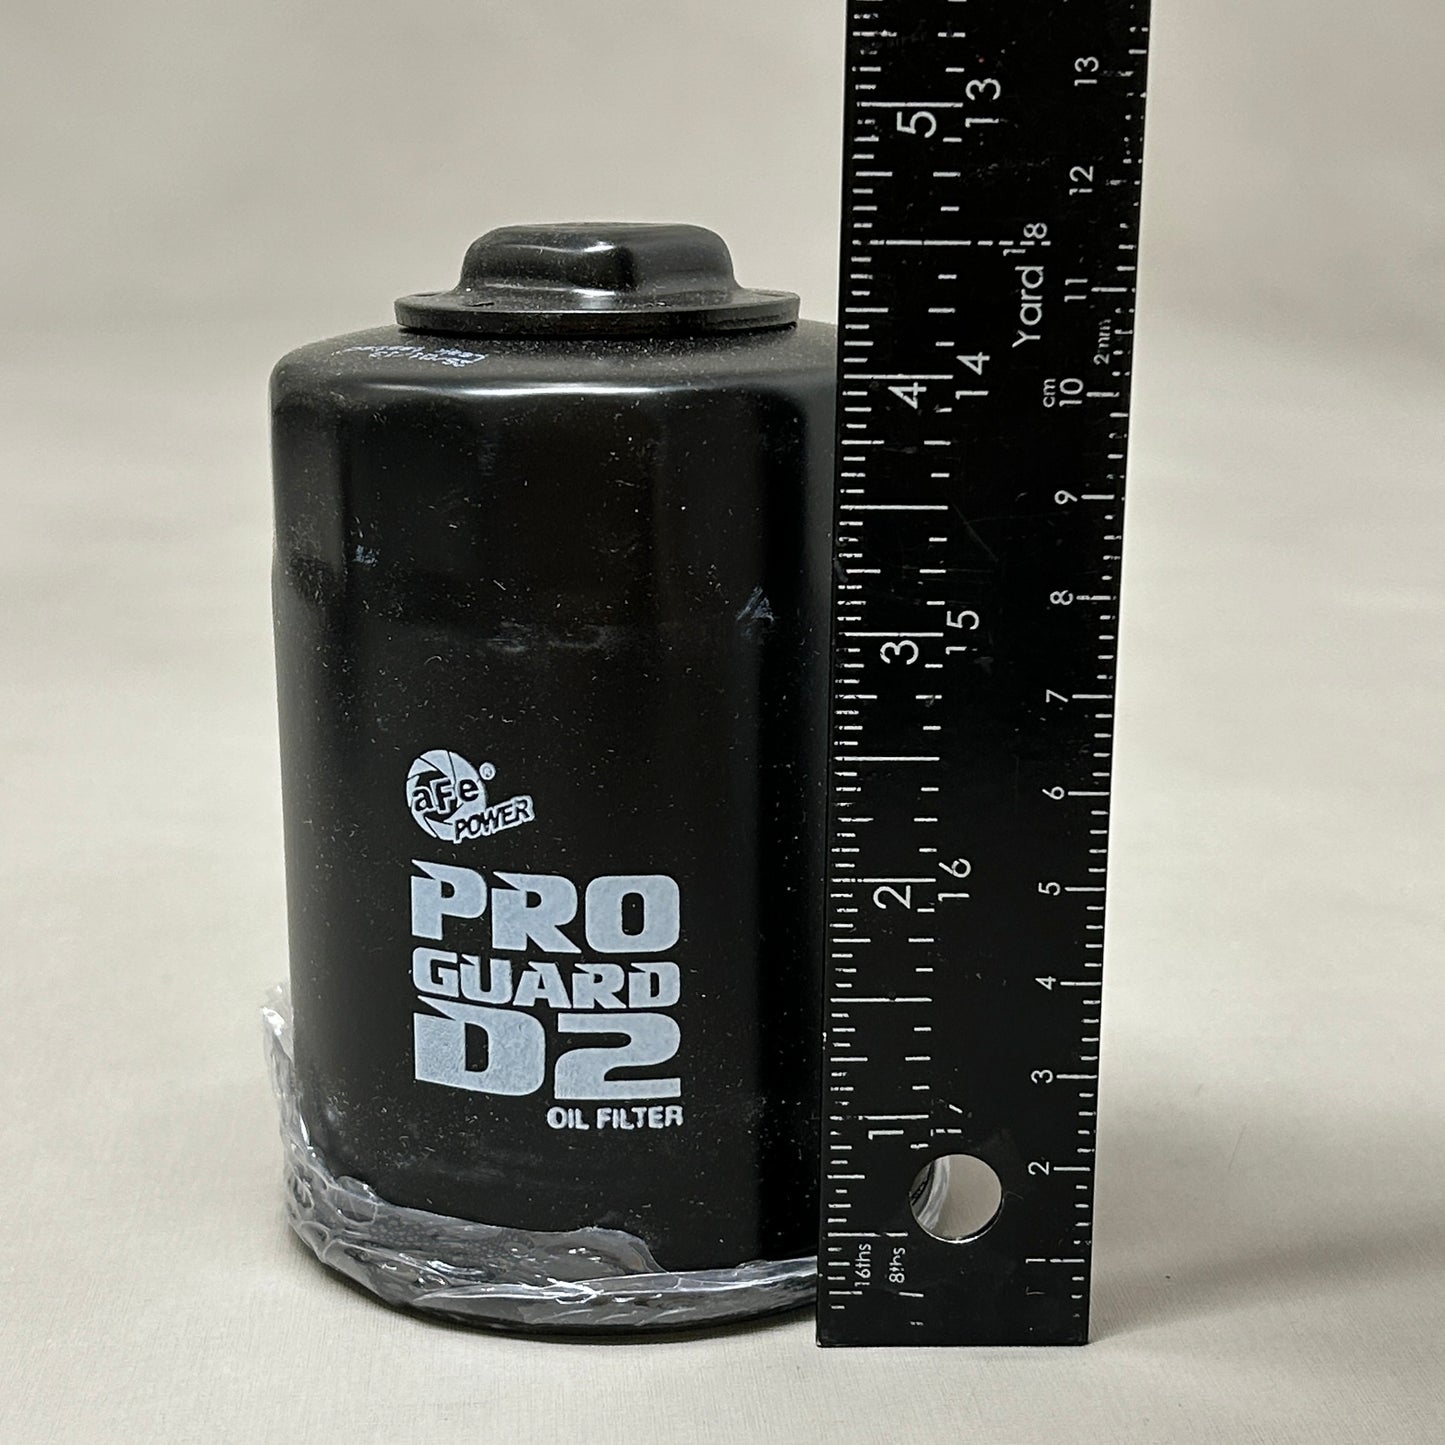 AFE Power Pro Guard D2 Oil Filter 44-LF025 (New)